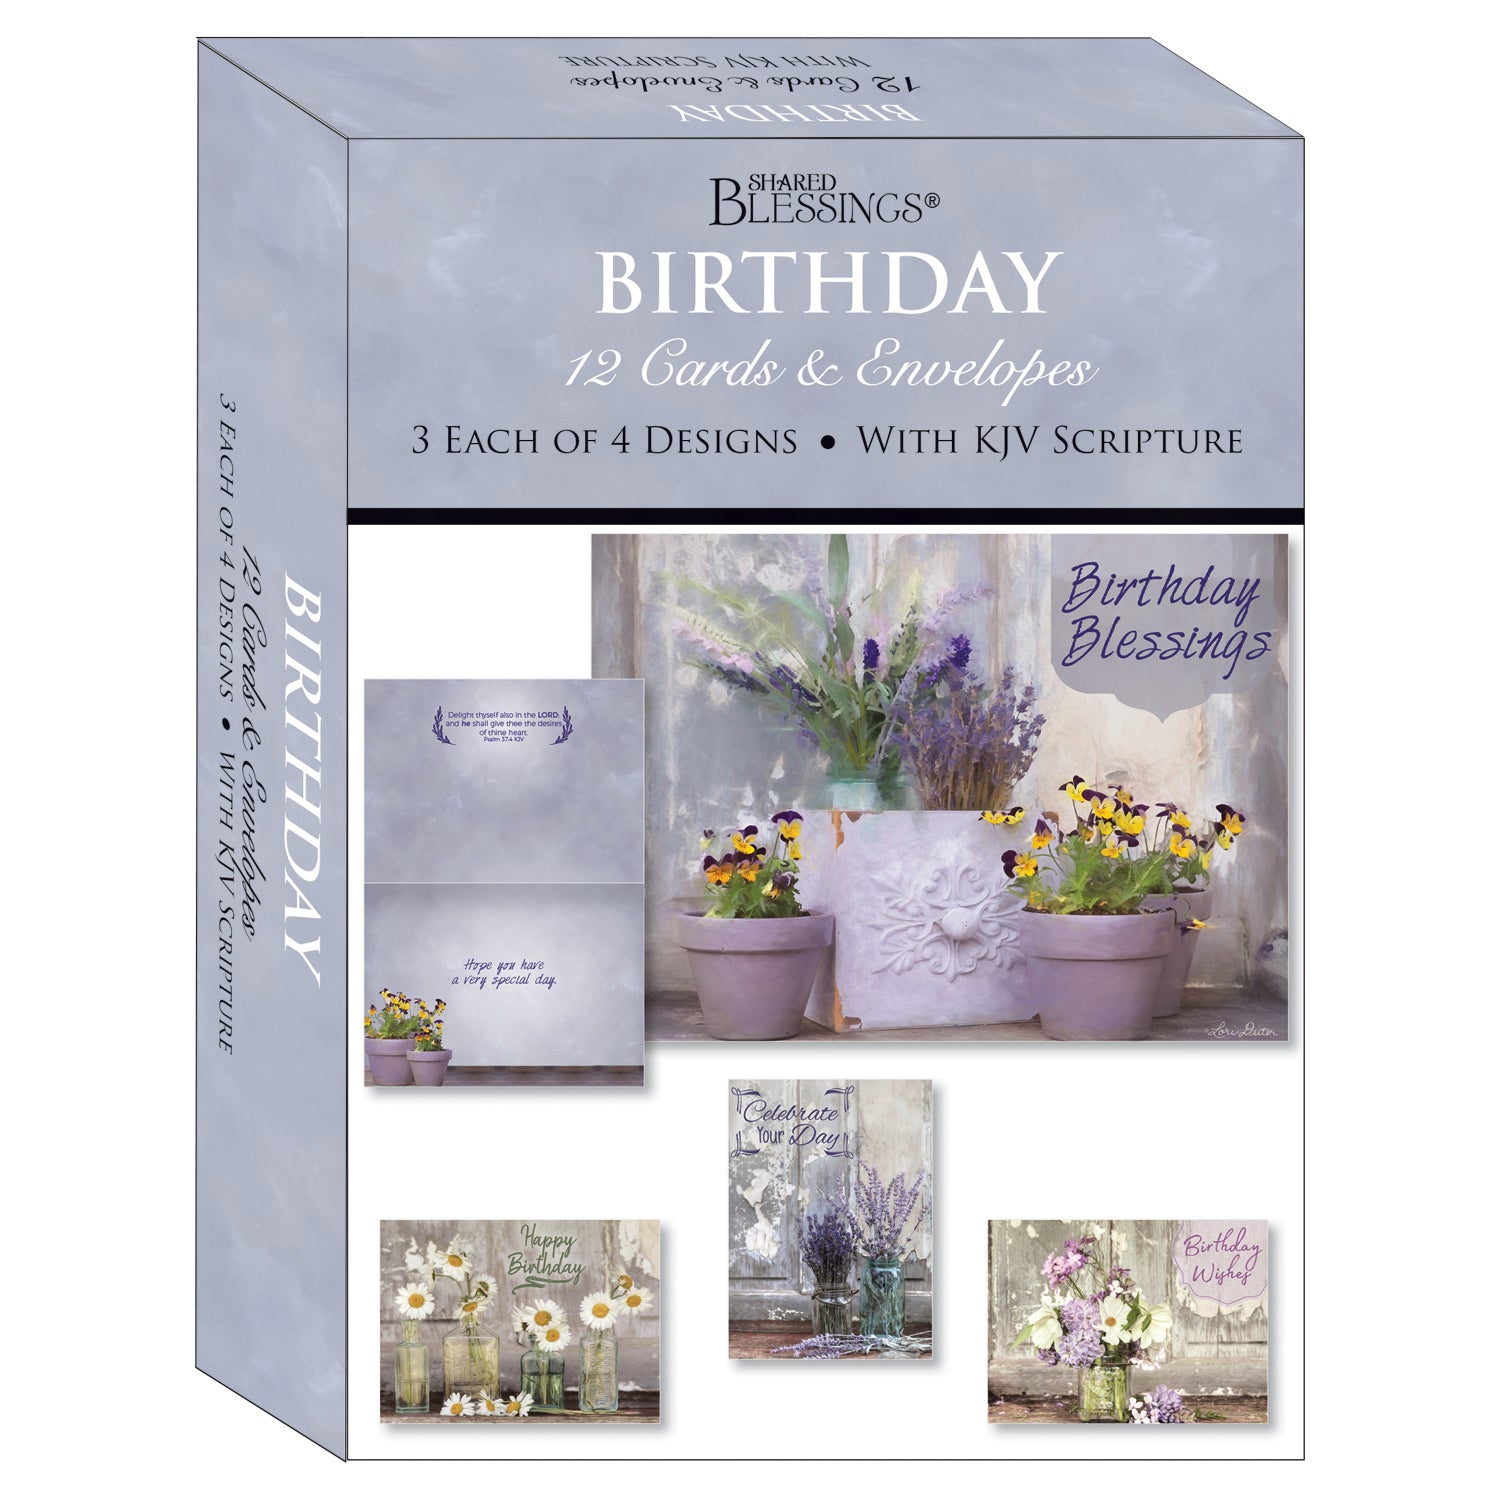 Lavender Blooms Greeting Card Organizer Box - Stores 140+ Cards (Not Included). 7 x 9 x 9-1/2